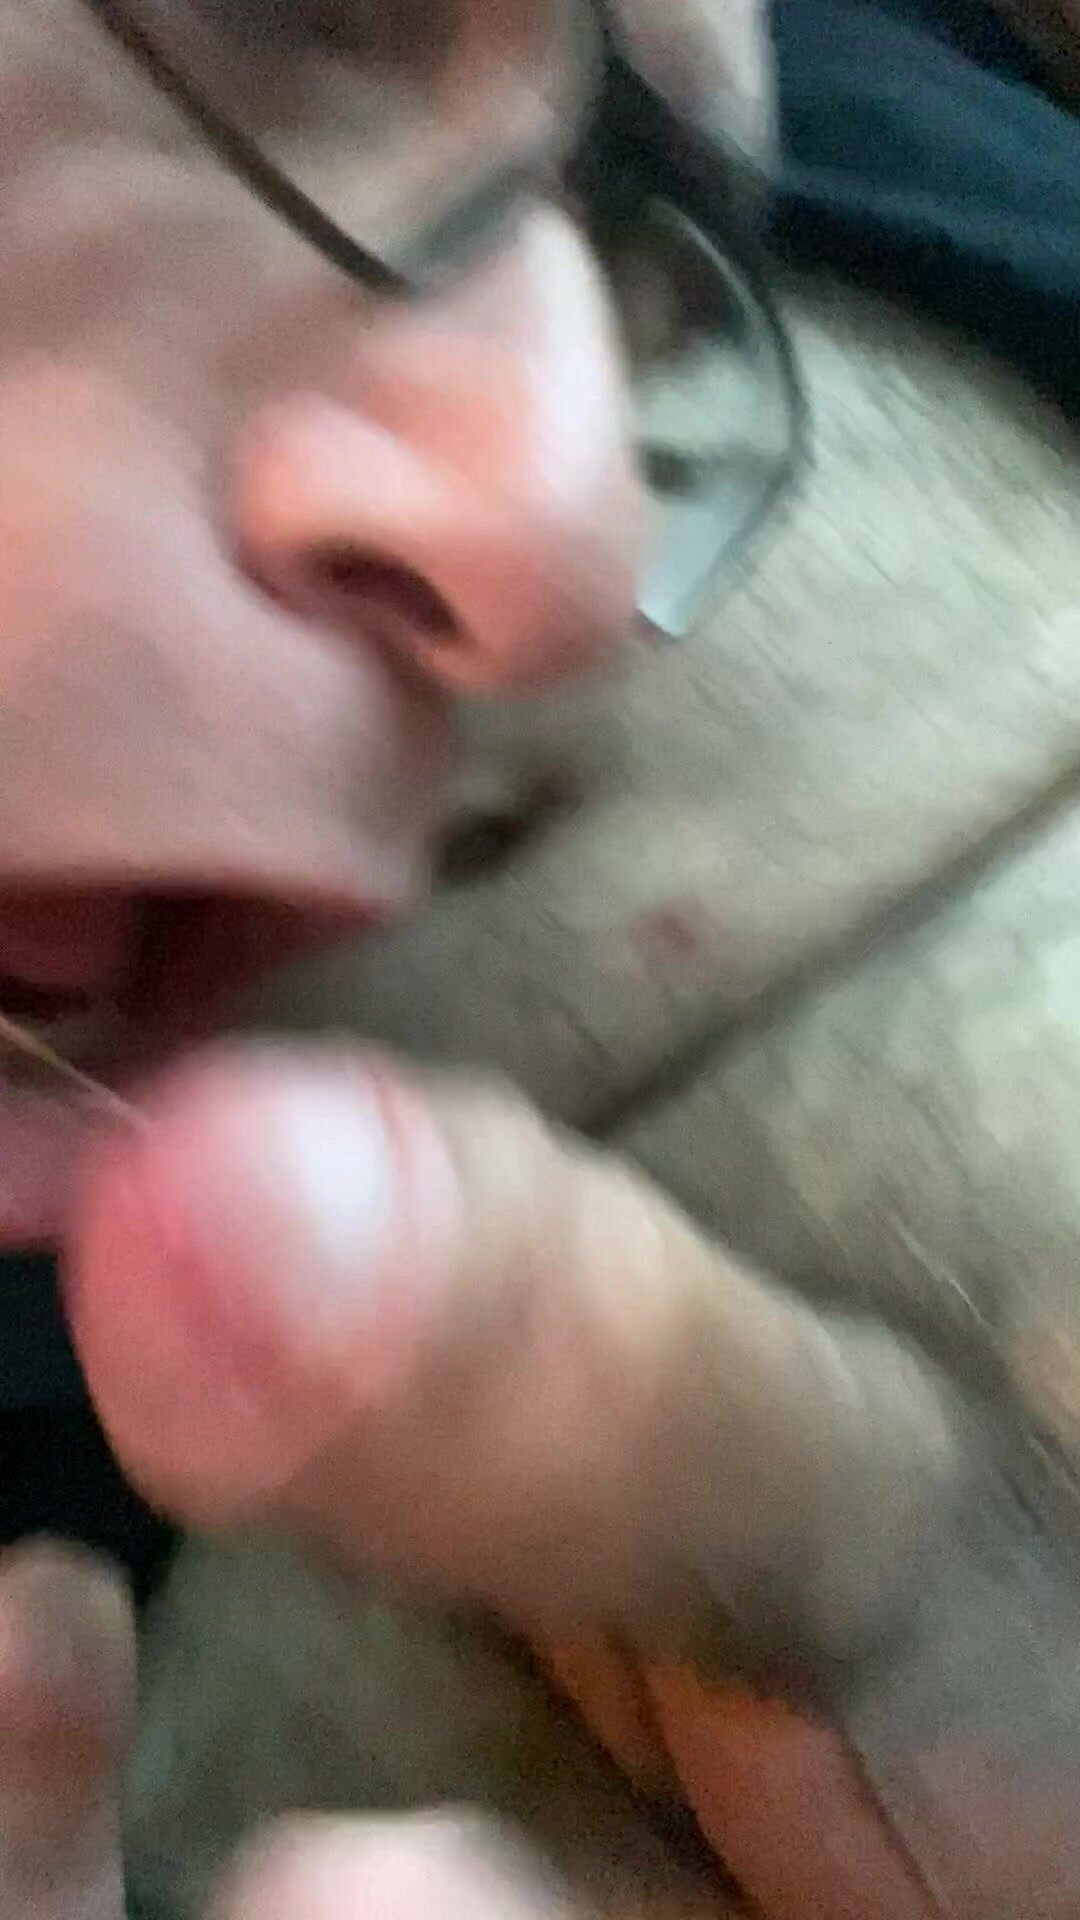 “Yes, Take Photos of Me Sucking Your Cock”